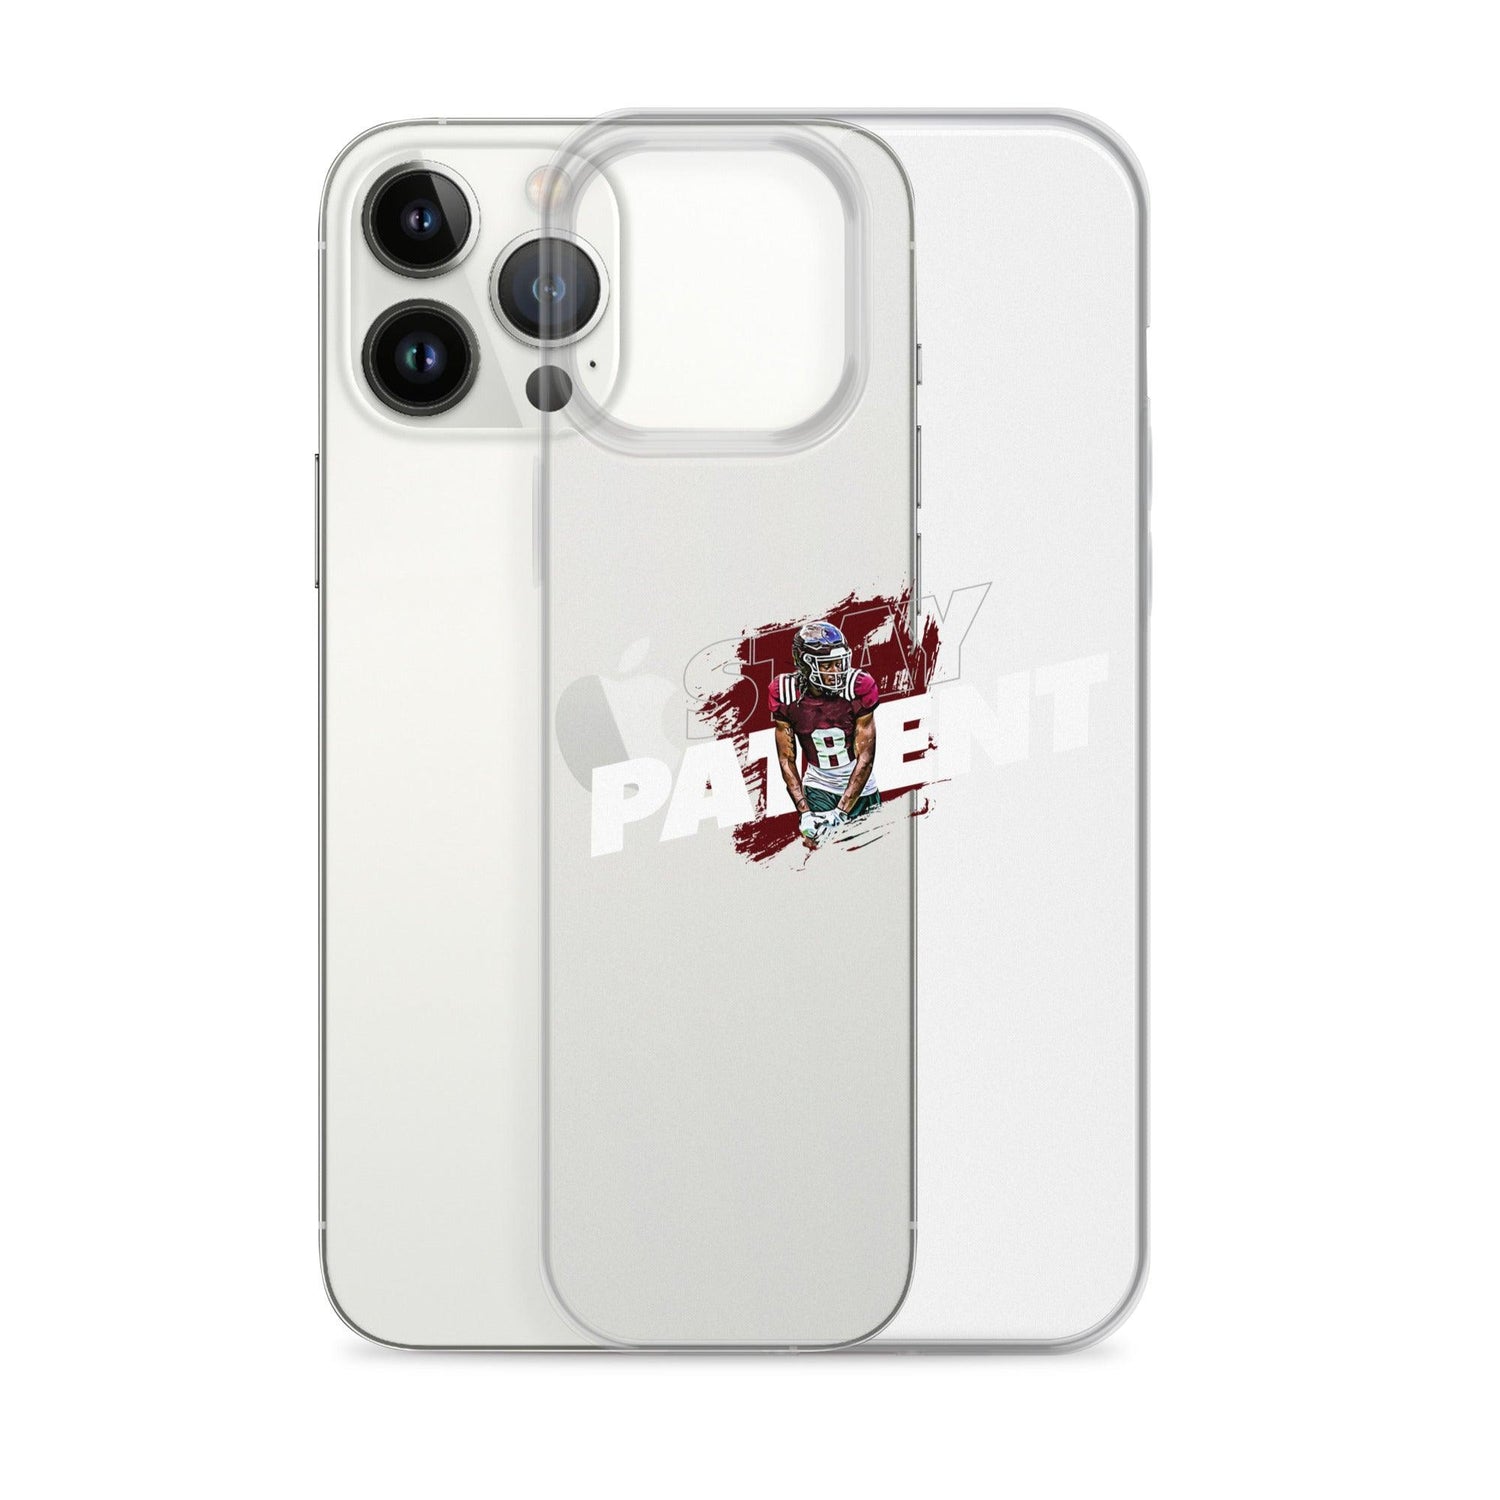 Yulkeith Brown "Stay Patient" iPhone Case - Fan Arch